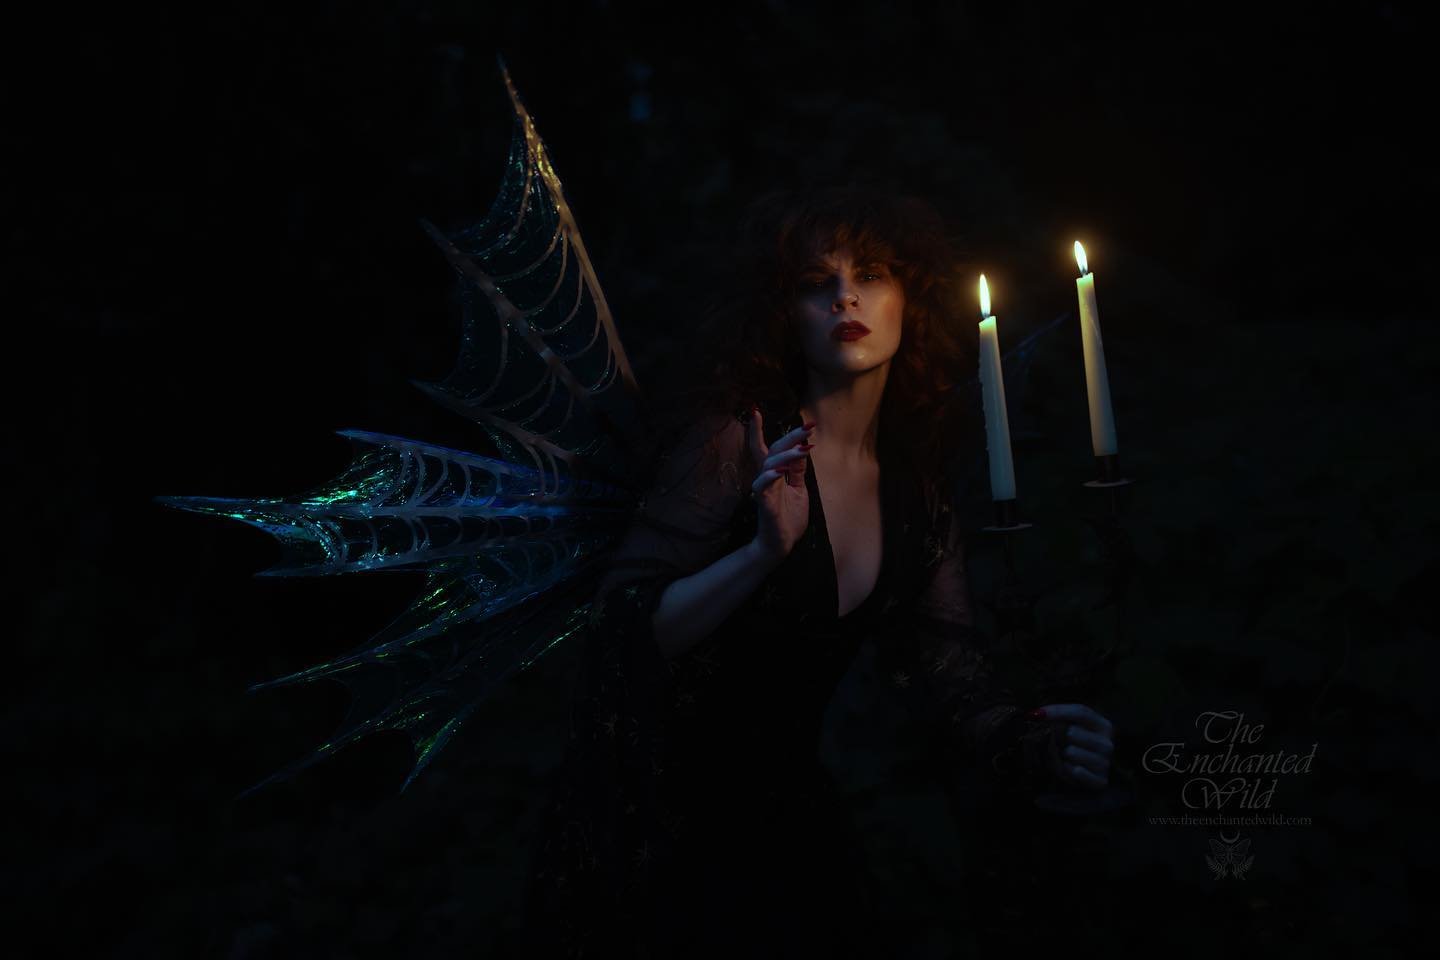 Collaborated with one of my favourite faeries to showcase the variety of possibilities we offer! We captured most of the wings available for photoshoots with three different looks. Here is our third with a dark enchantress fae wrapped in darkness and